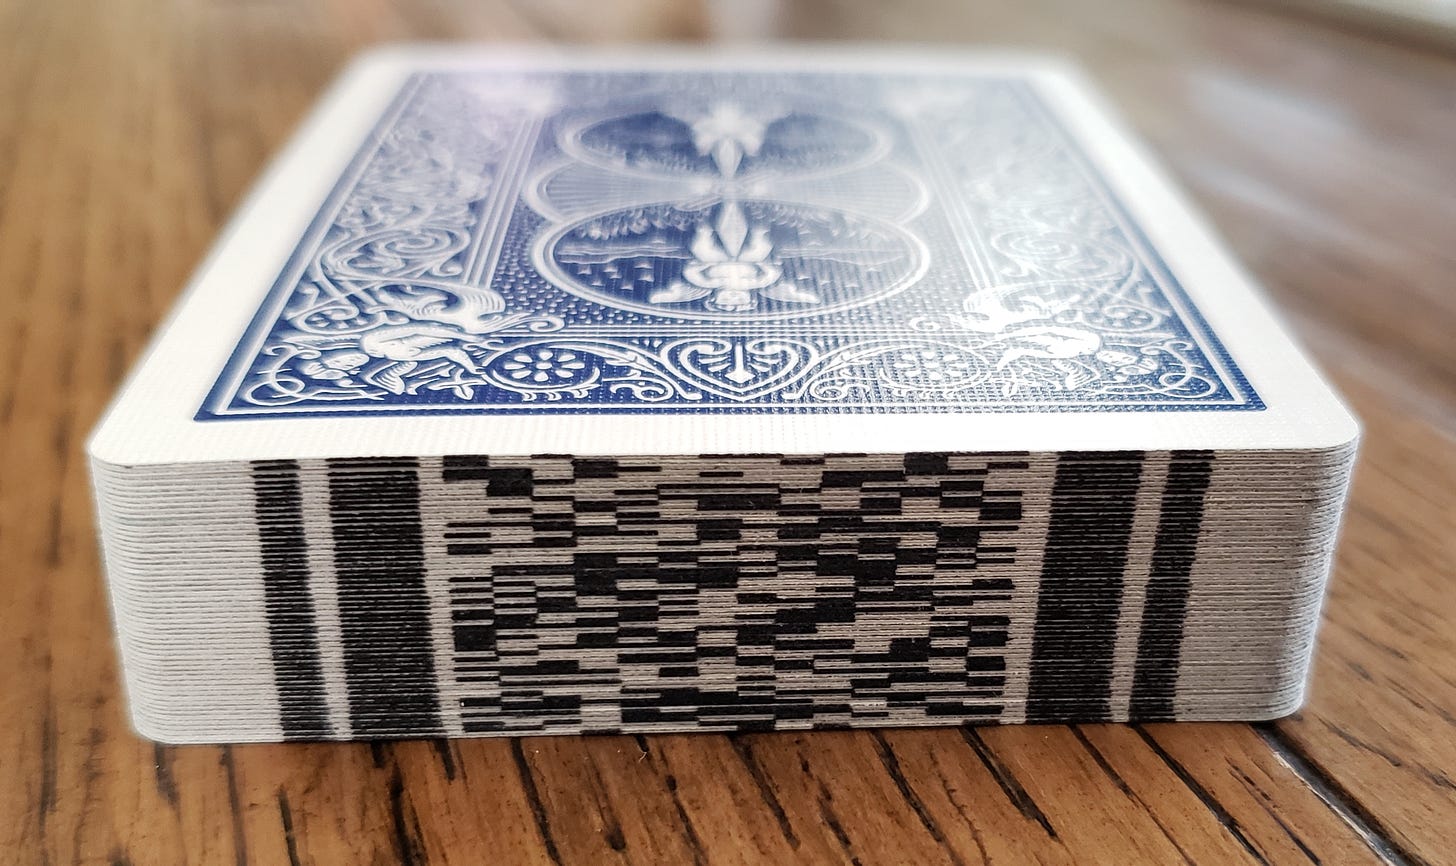 A deck of cards with digital marks printed on the edge of each card.